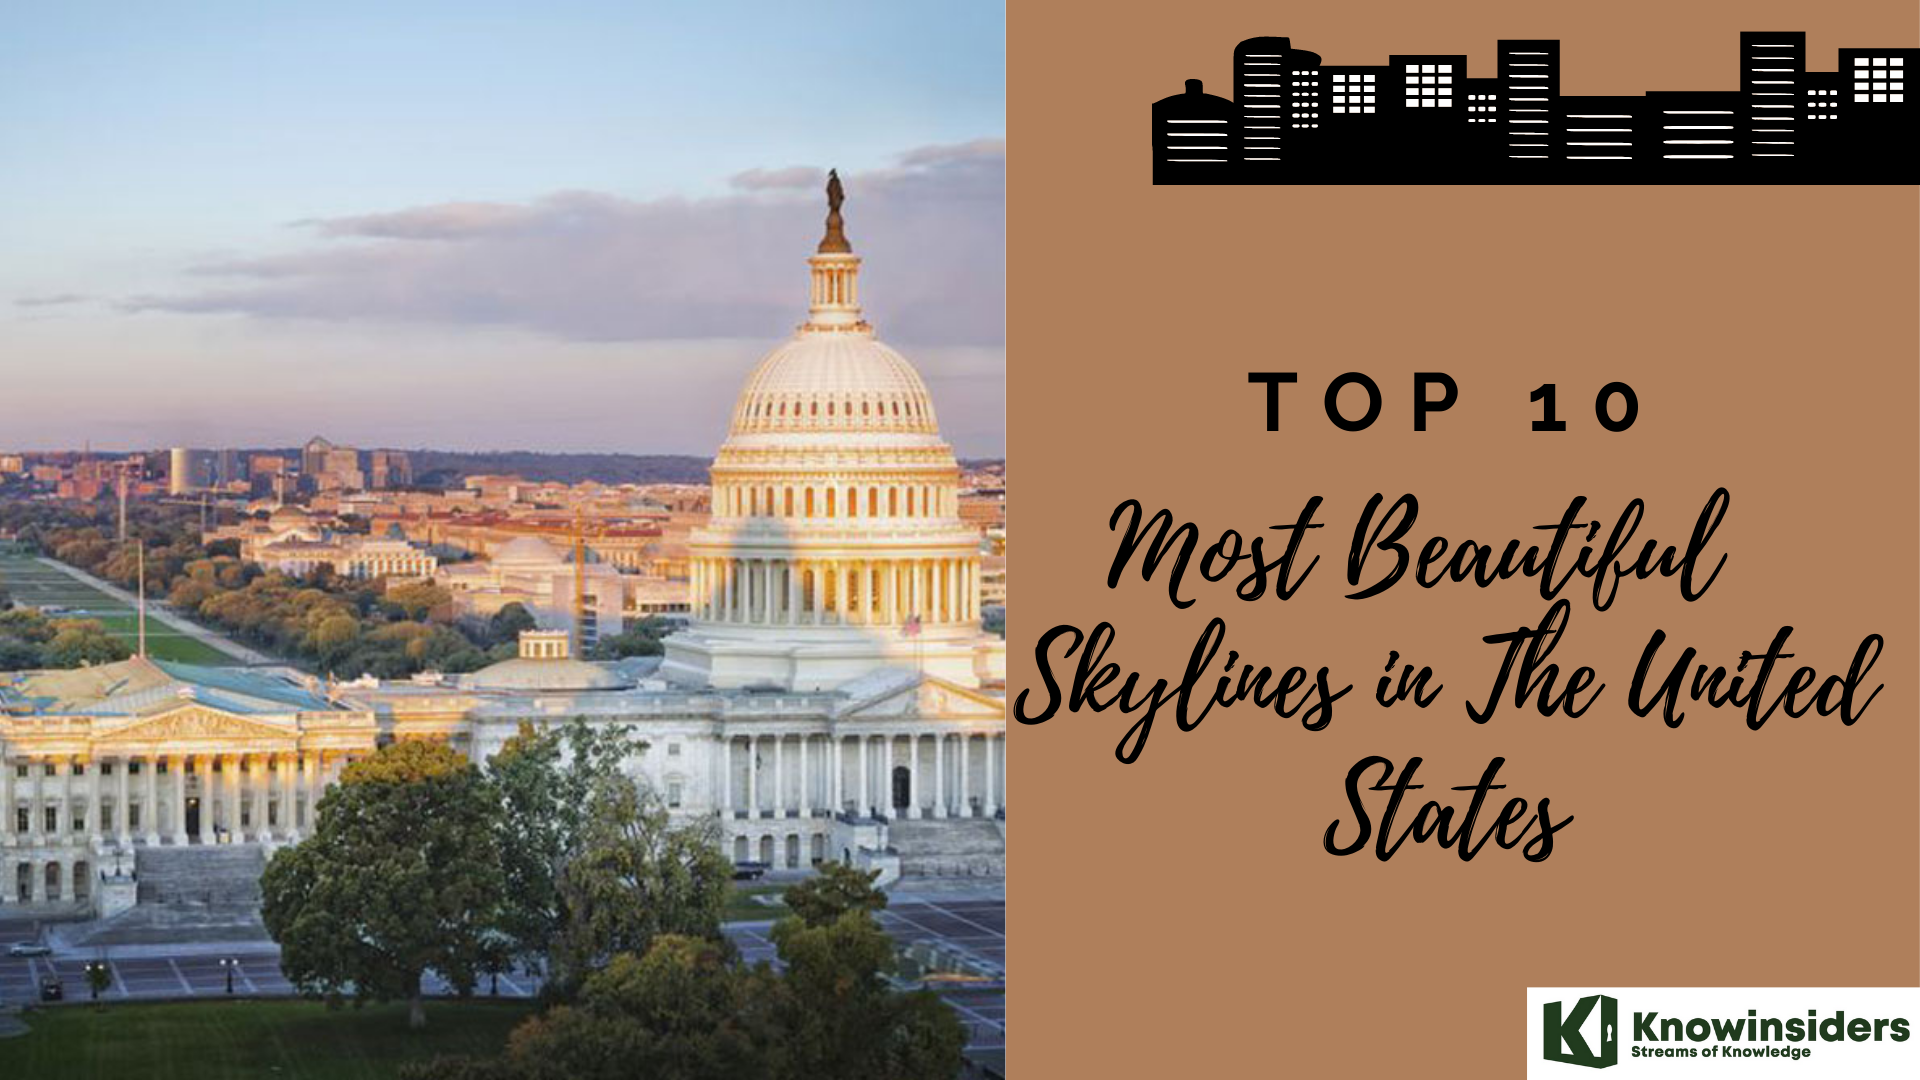 Top 10 Most Beautiful Skylines in The United States